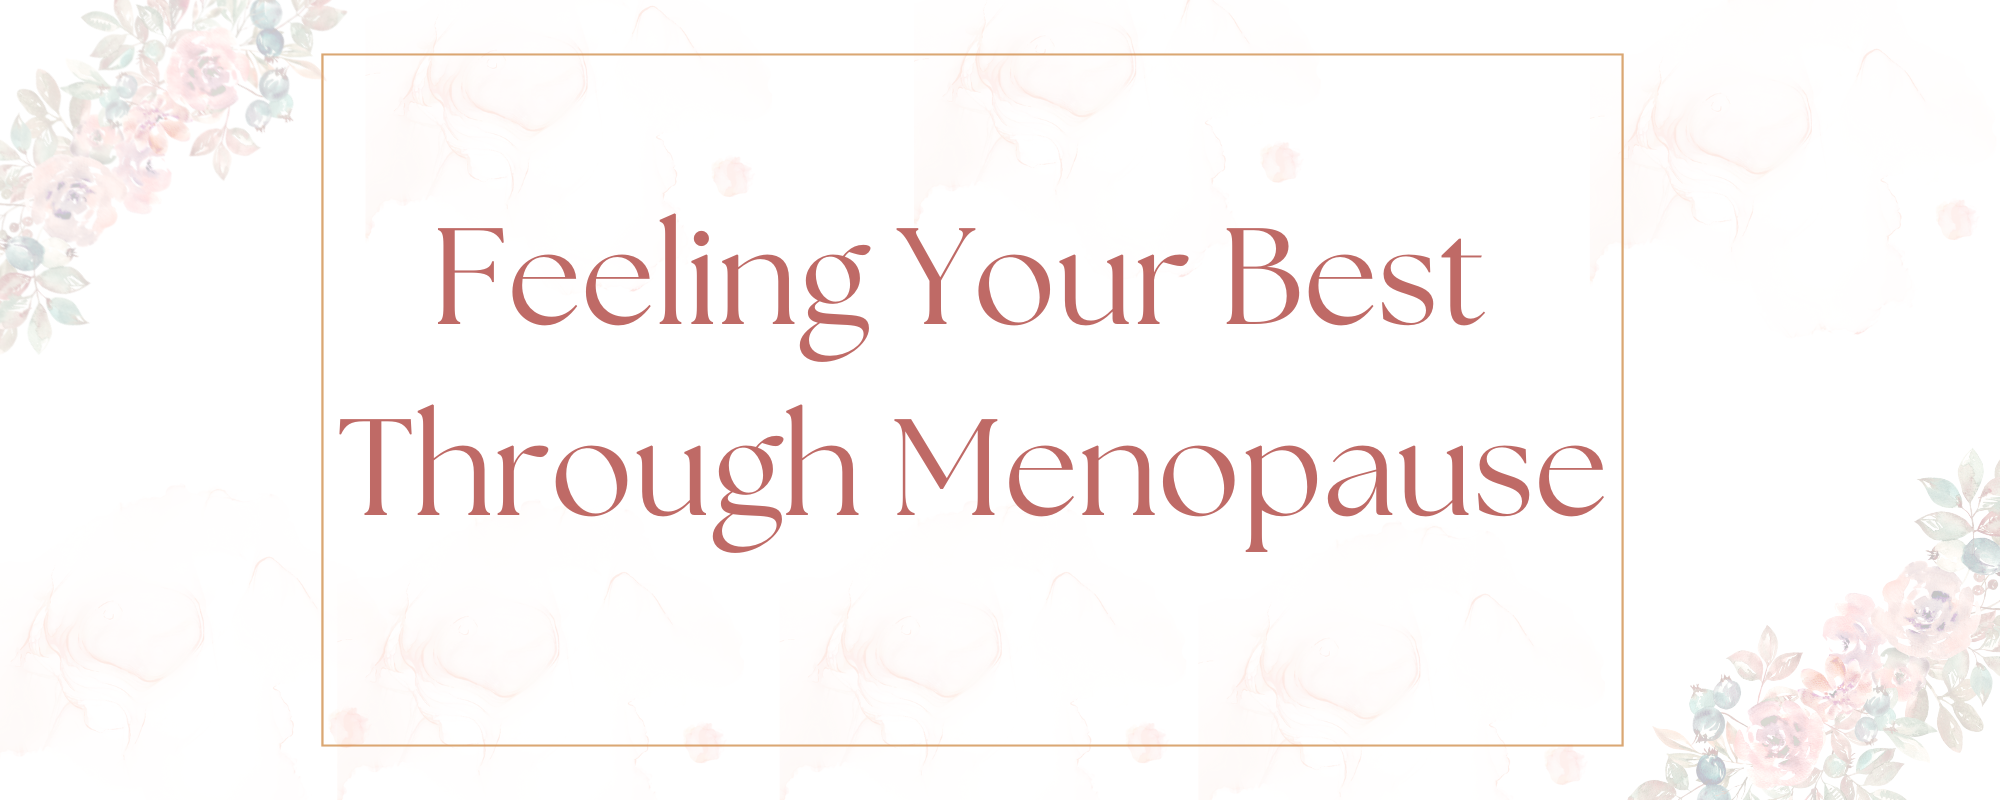 Feeling your best through menopause